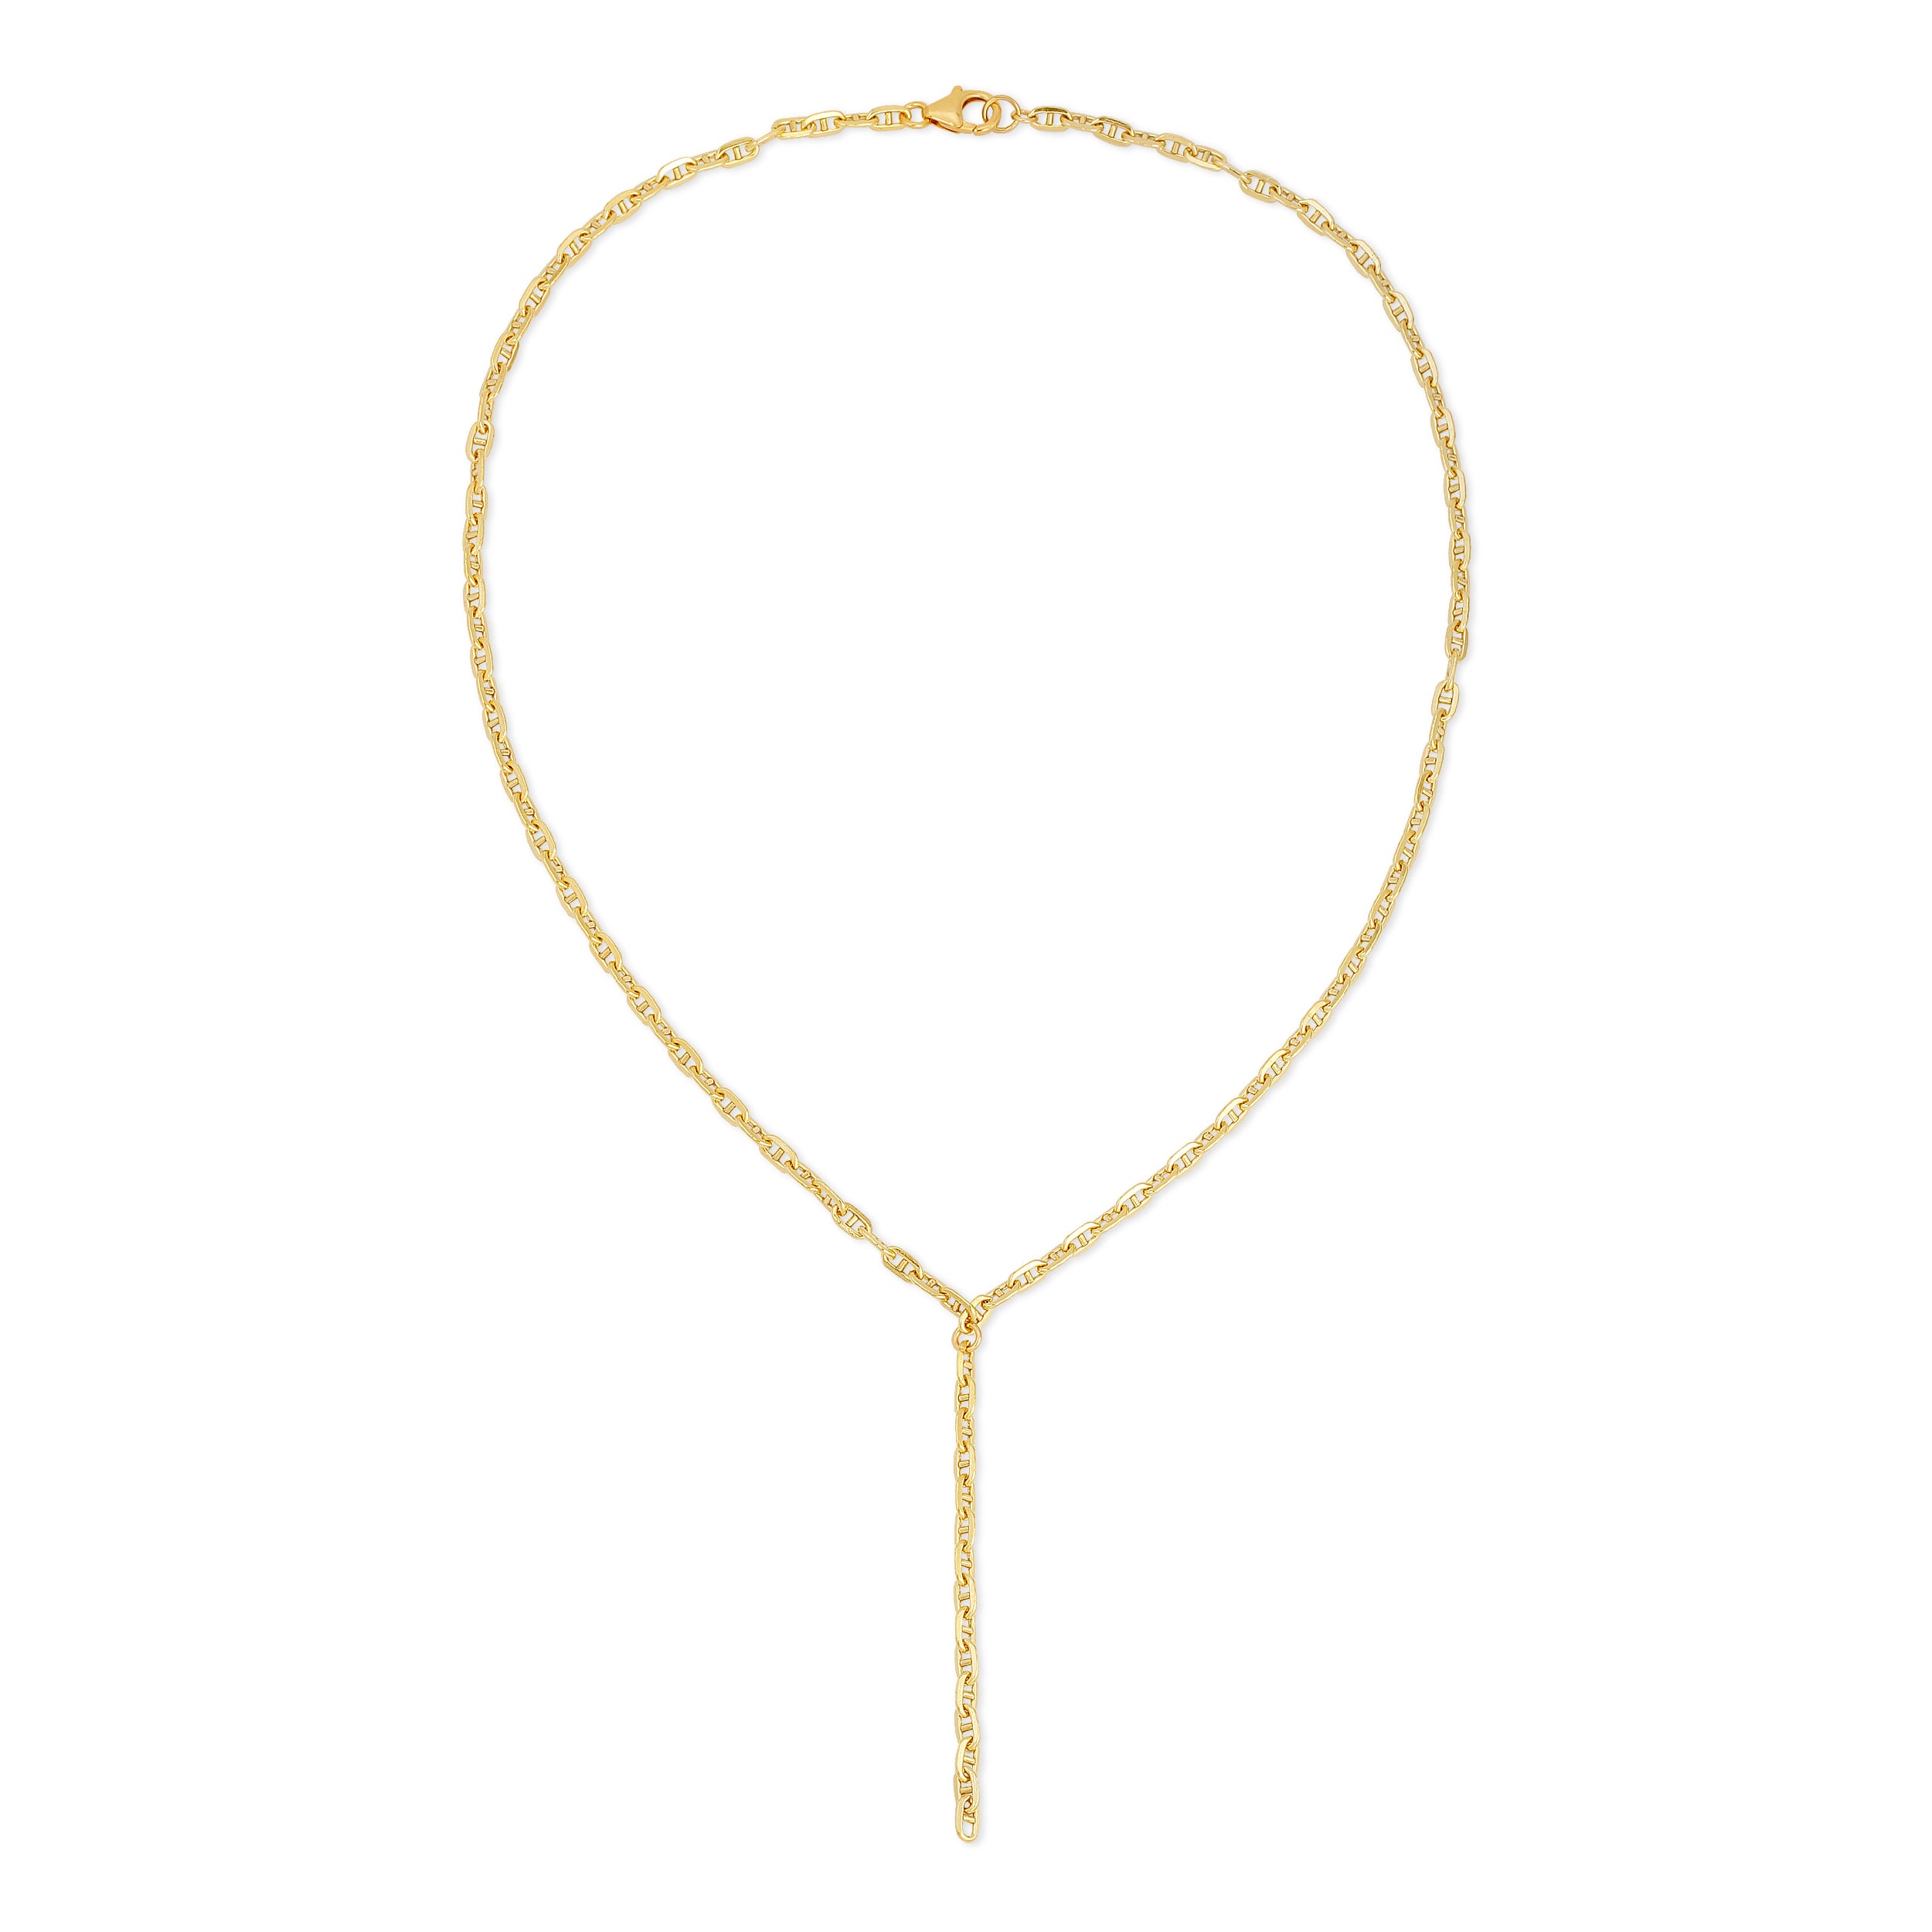 Gold Gucci Chain Necklace